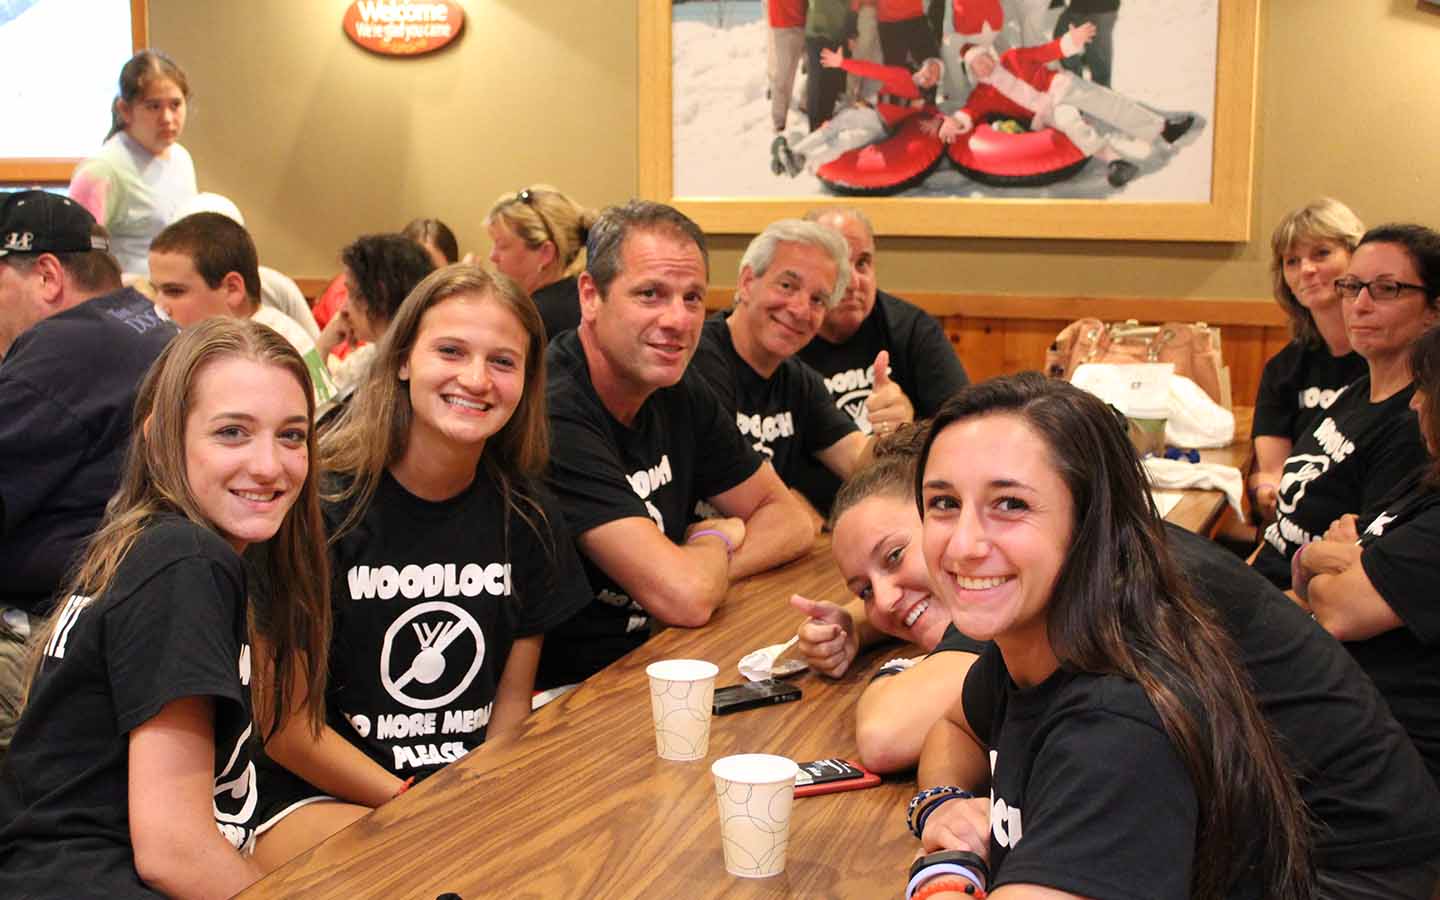 Group of parents and young women at table in matching black t-shirts.